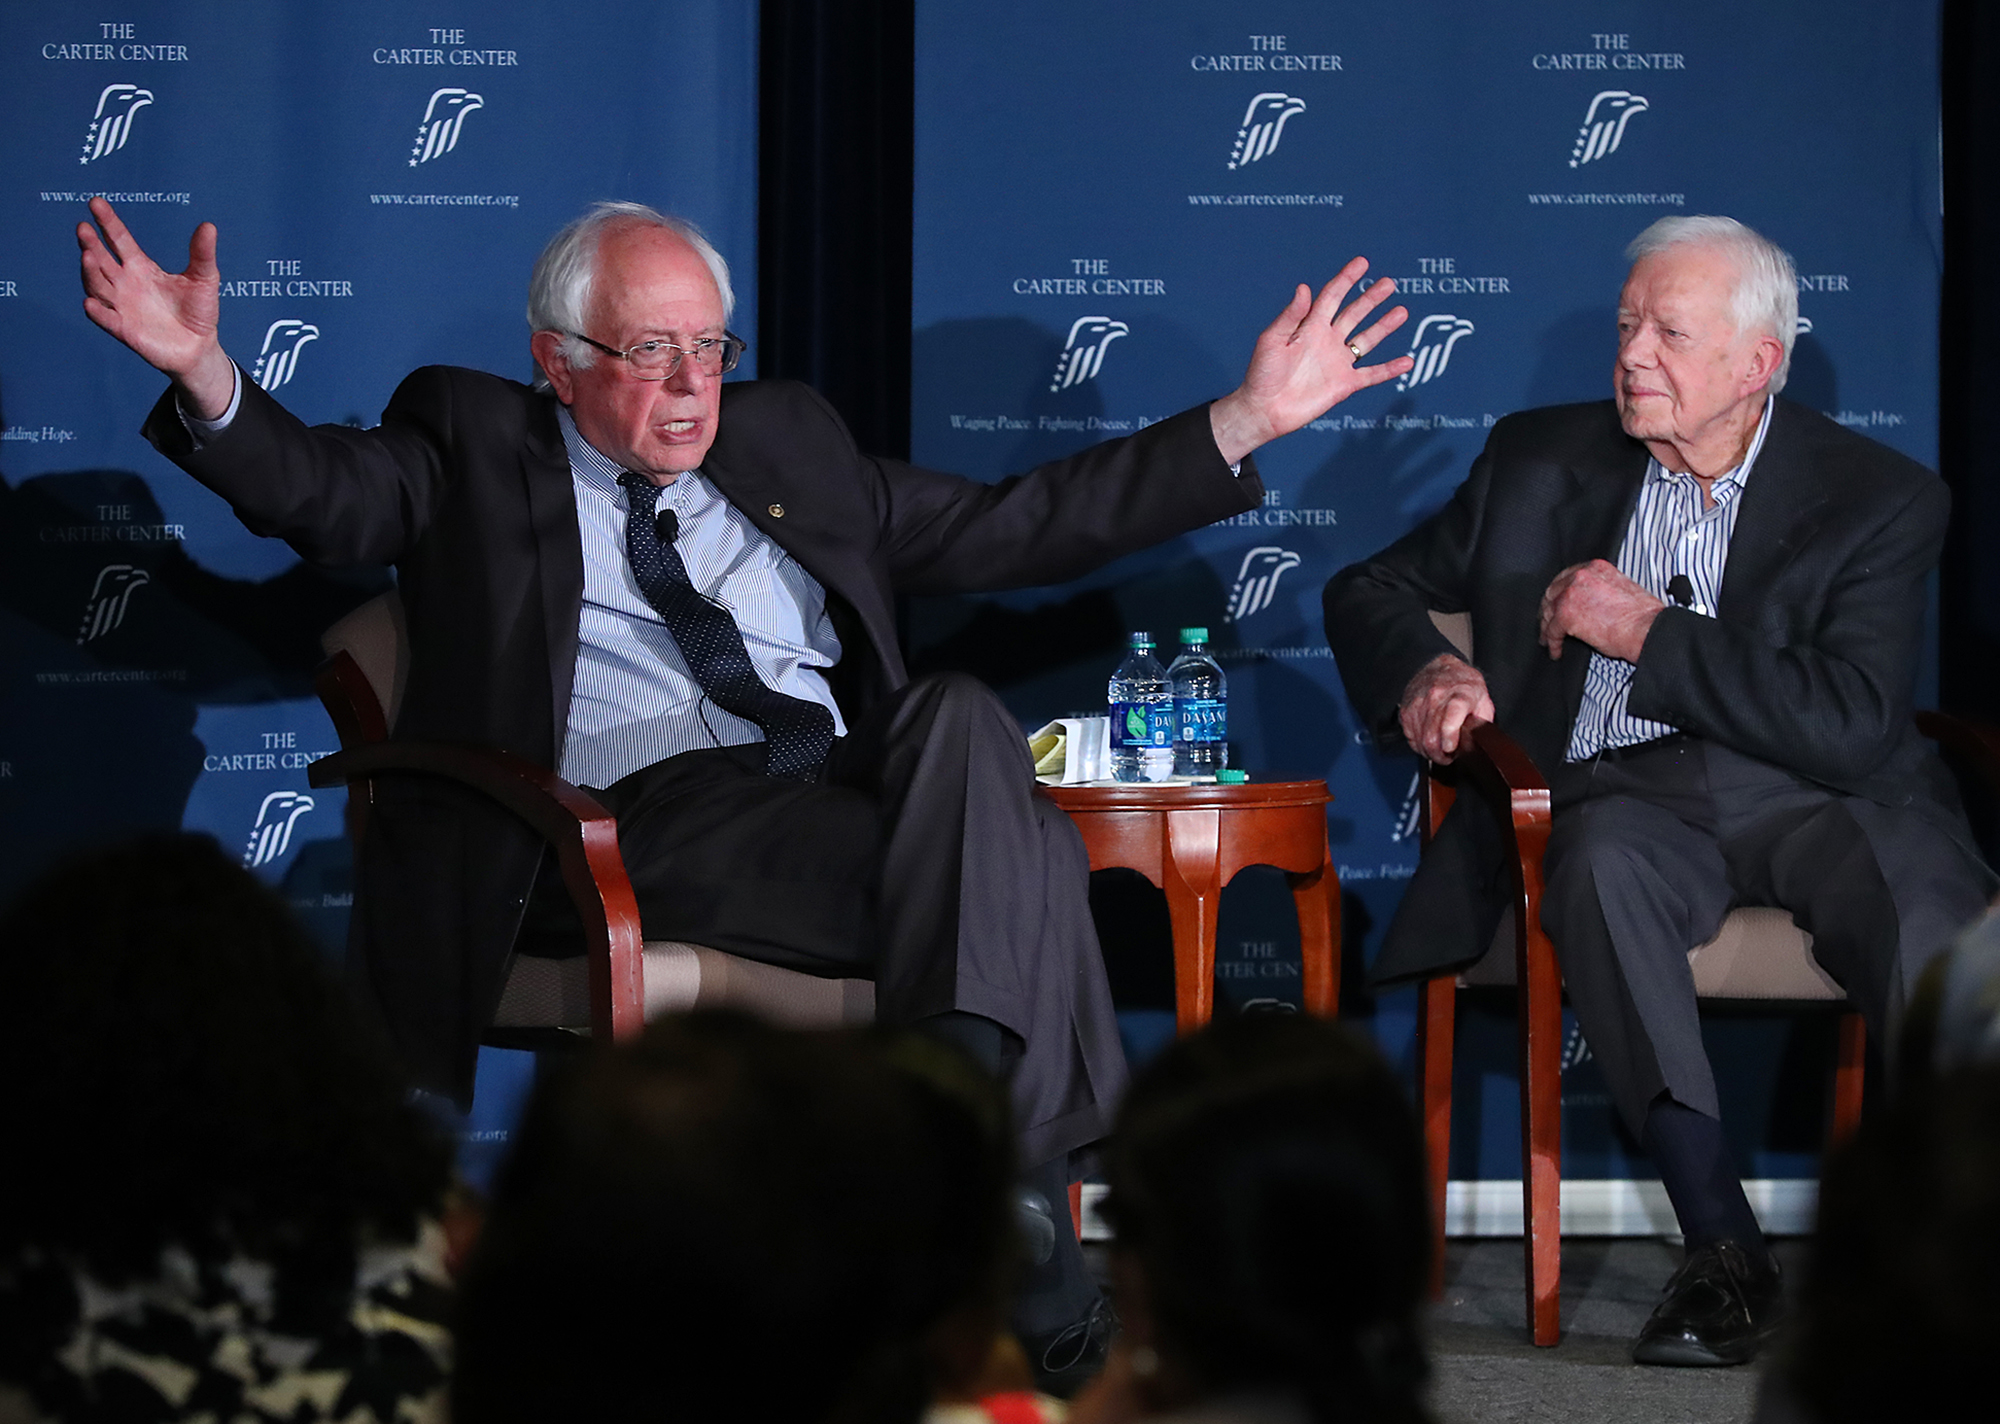 Jimmy Carter on Bernie Sanders: ‘Can you all see why I voted for him?’